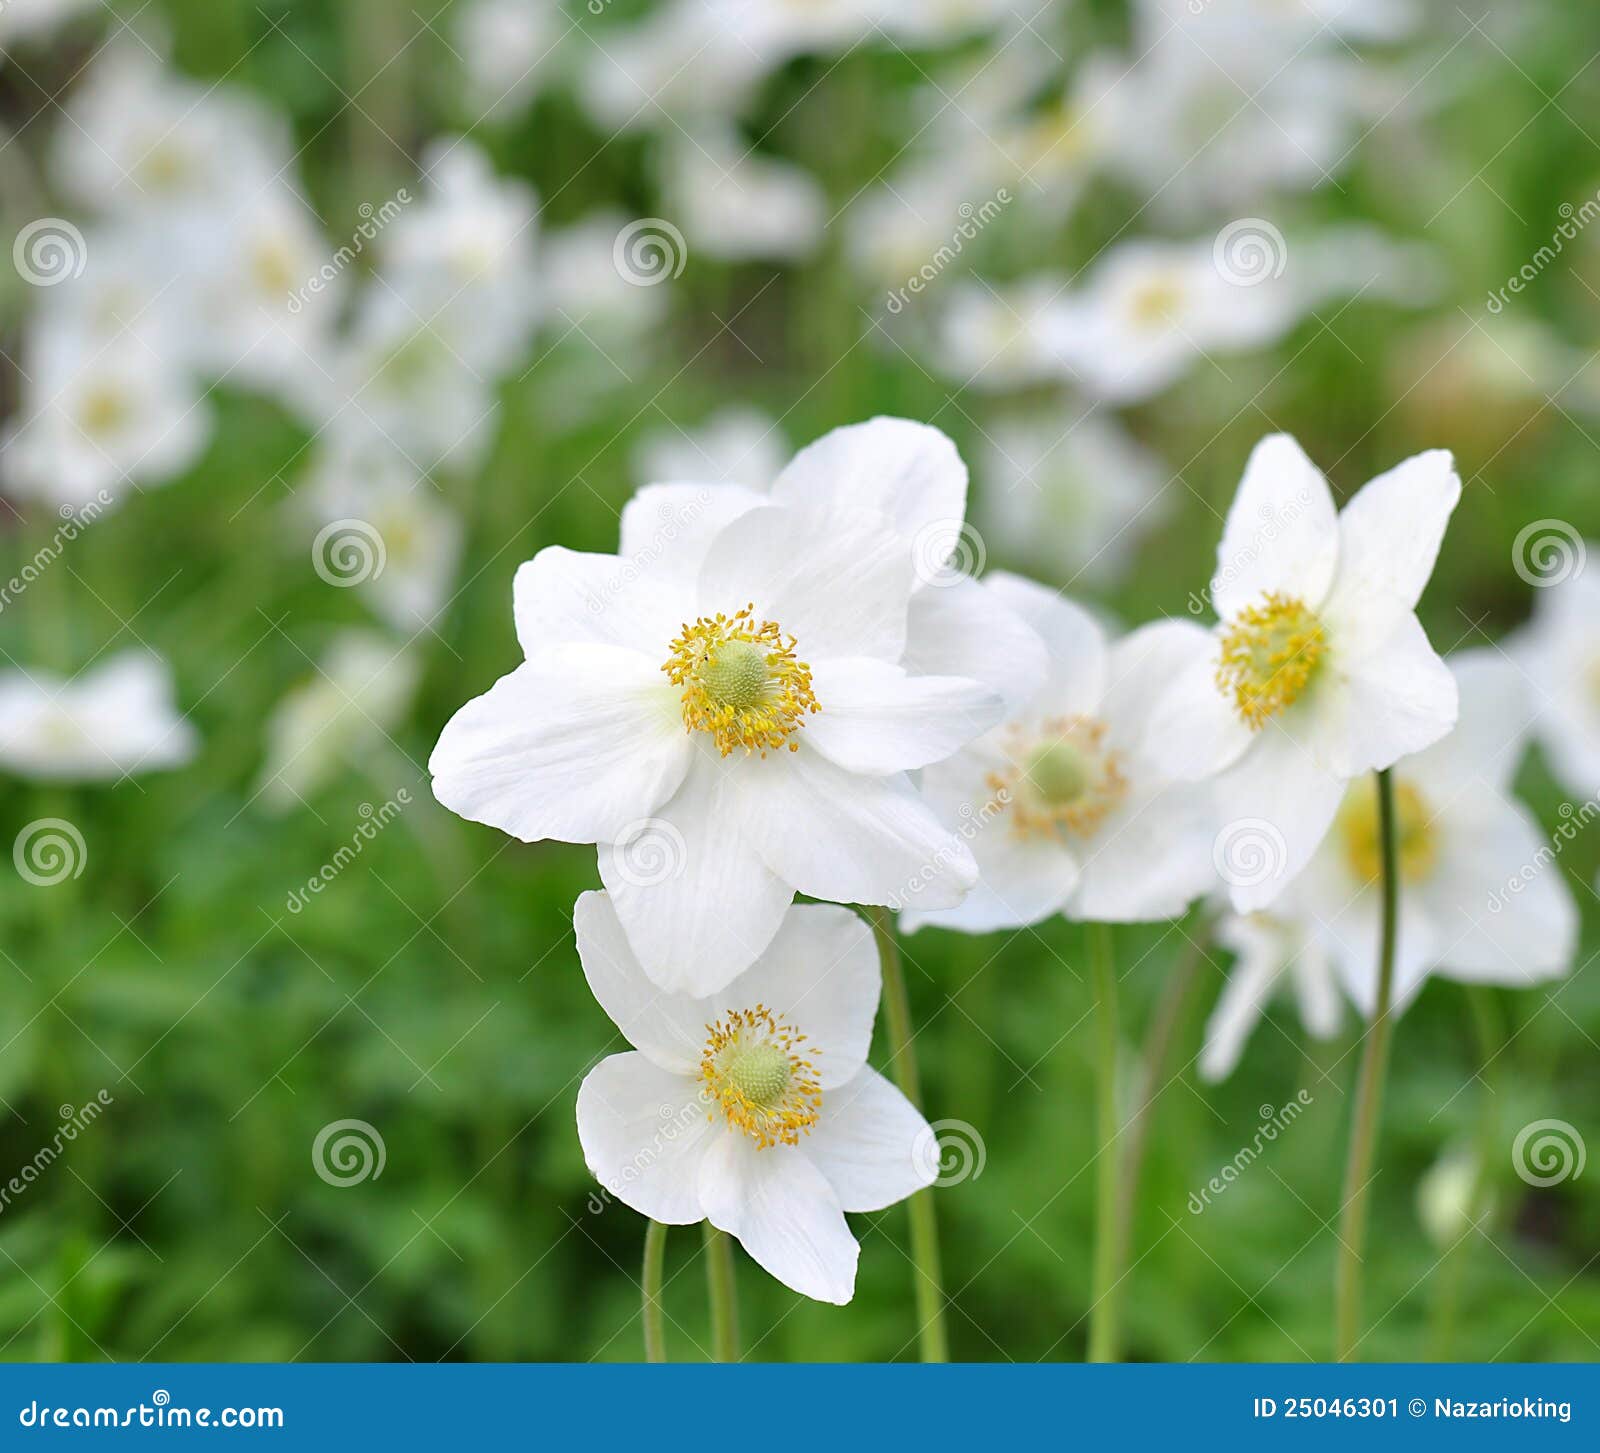 Beautiful white flowers stock image. Image of blooming - 25046301